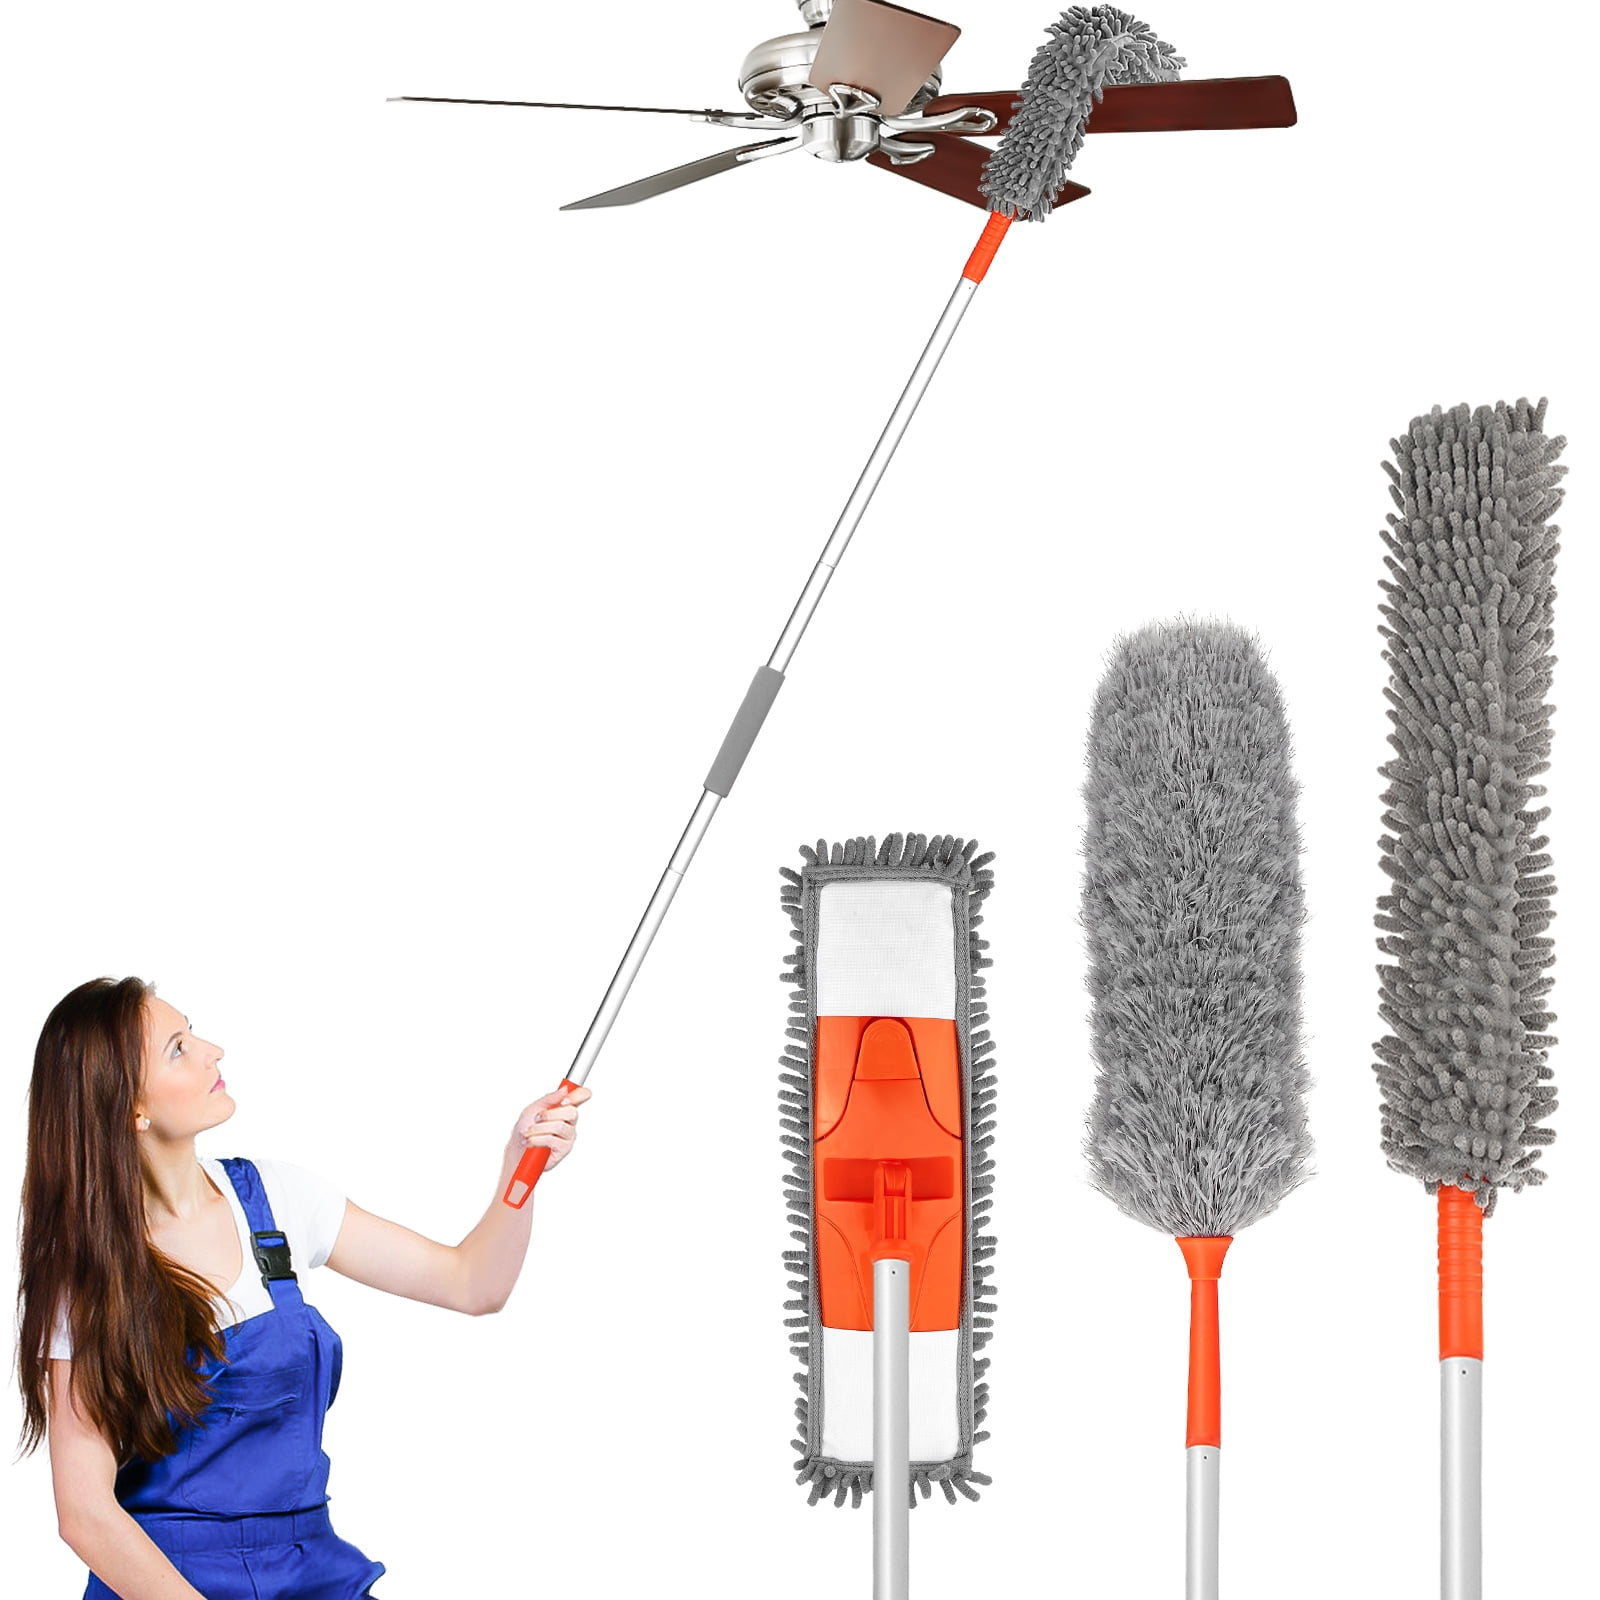  OXO Good Grips 3-in-1 Extendable Microfiber Long Reach Duster  with Interchangeable Heads, 8 ft : Health & Household